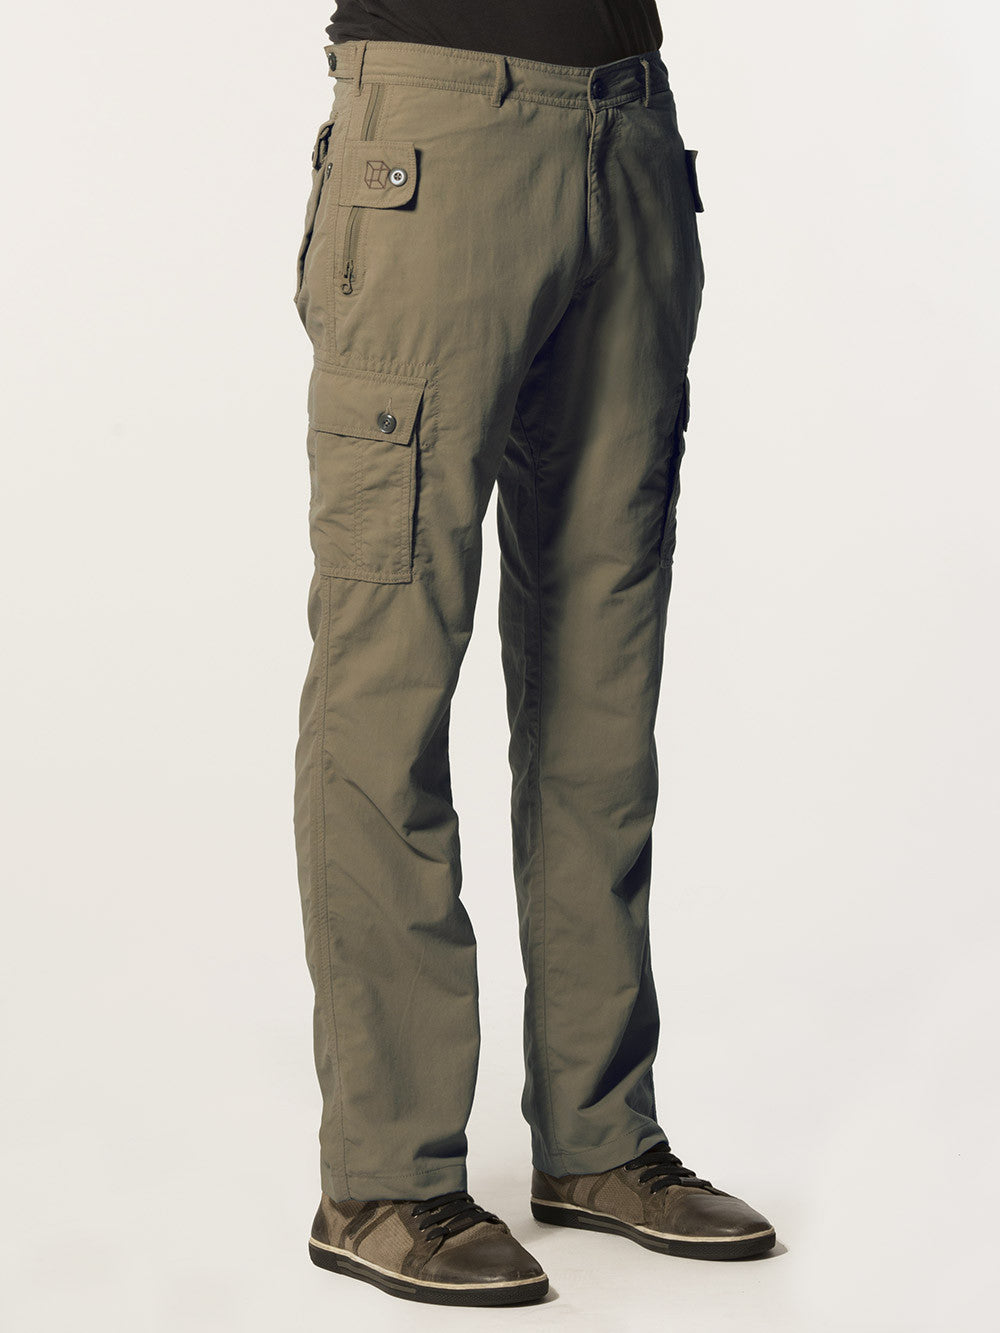 Buy timberland pants Online in INDIA at Low Prices at desertcart